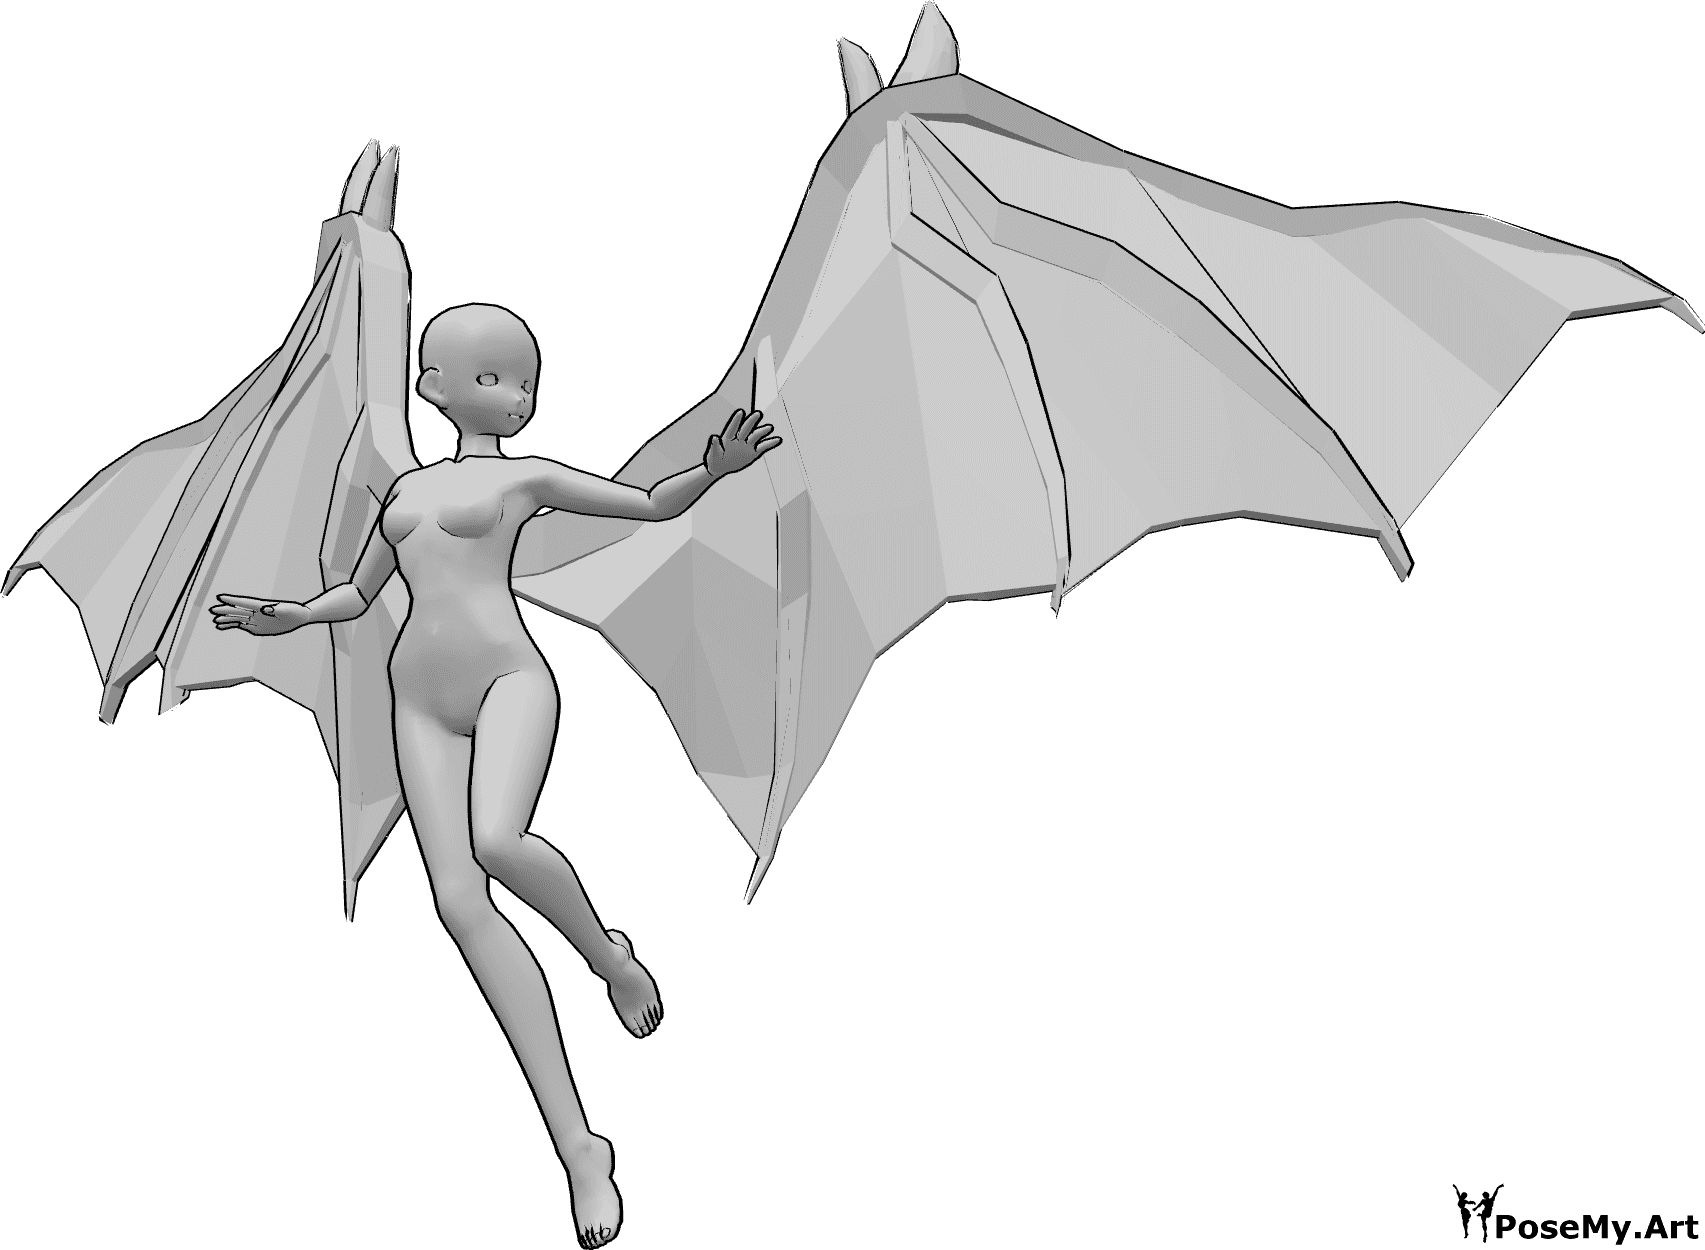 Pose Reference- Anime looking flying pose - Anime female with devil wings is flying and looking to the left